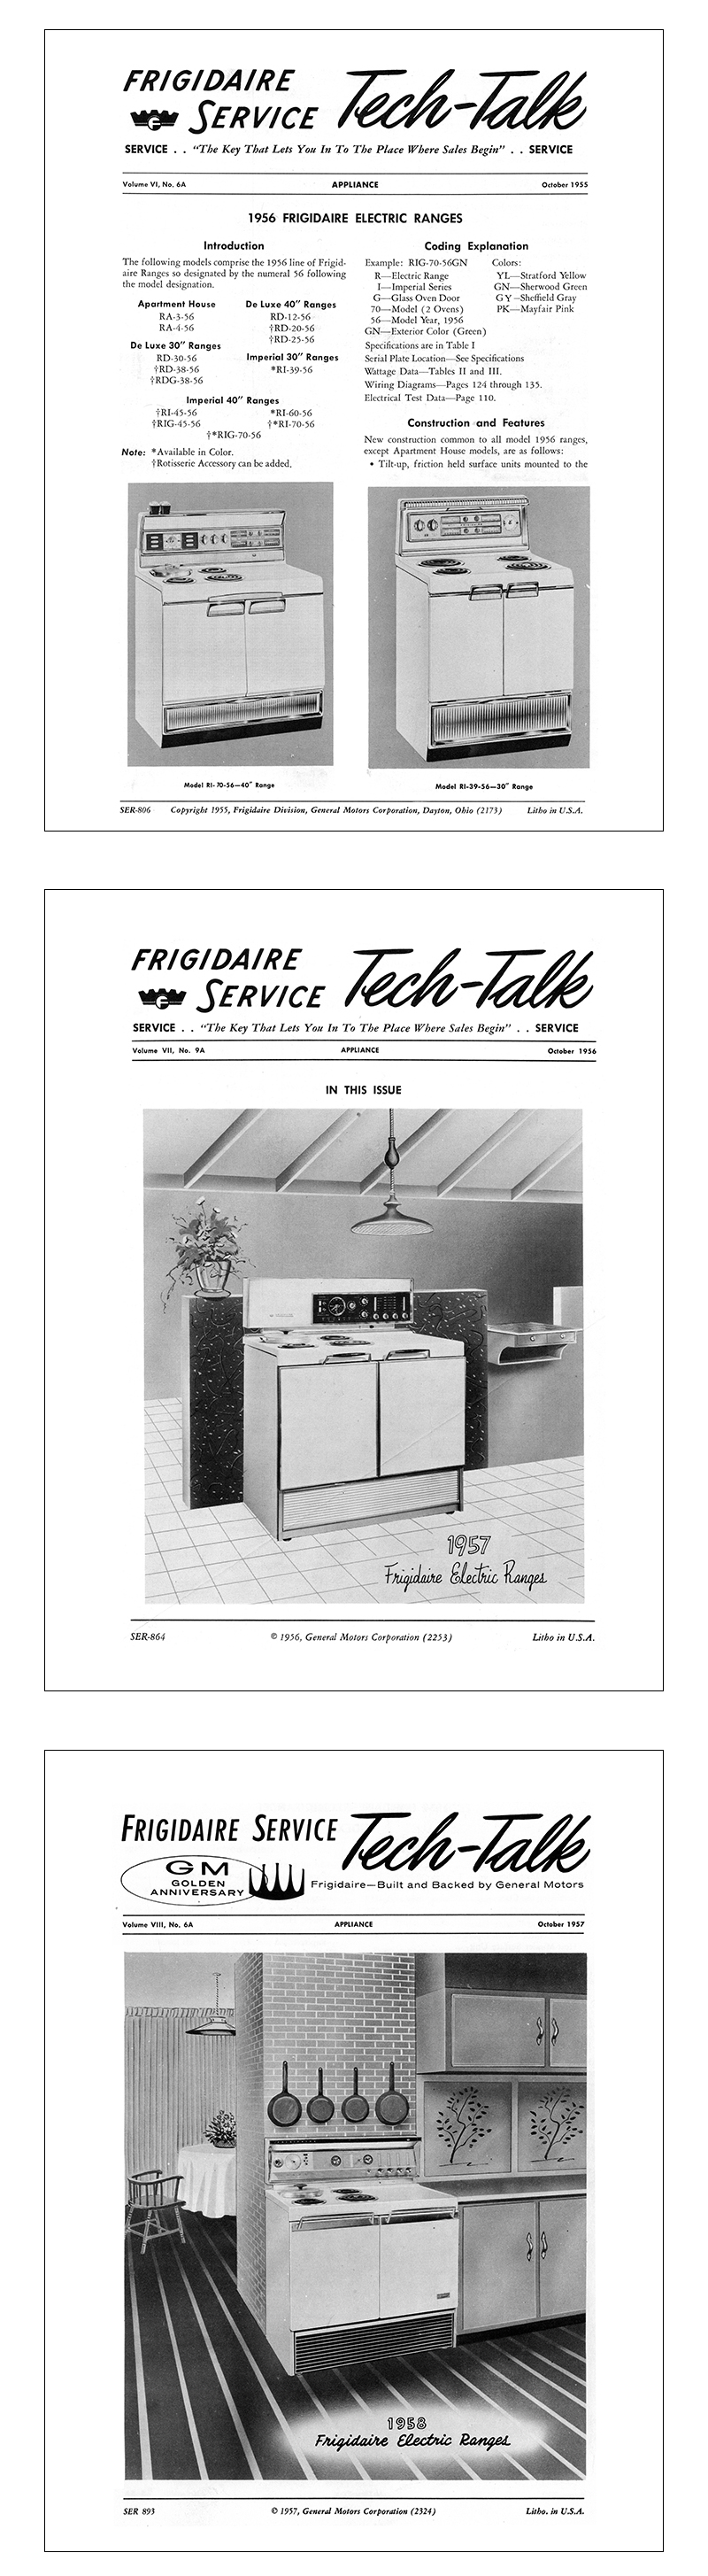 Kitchen Range Library-1960 Frigidaire 40 Inch Electric Range Owners Manual